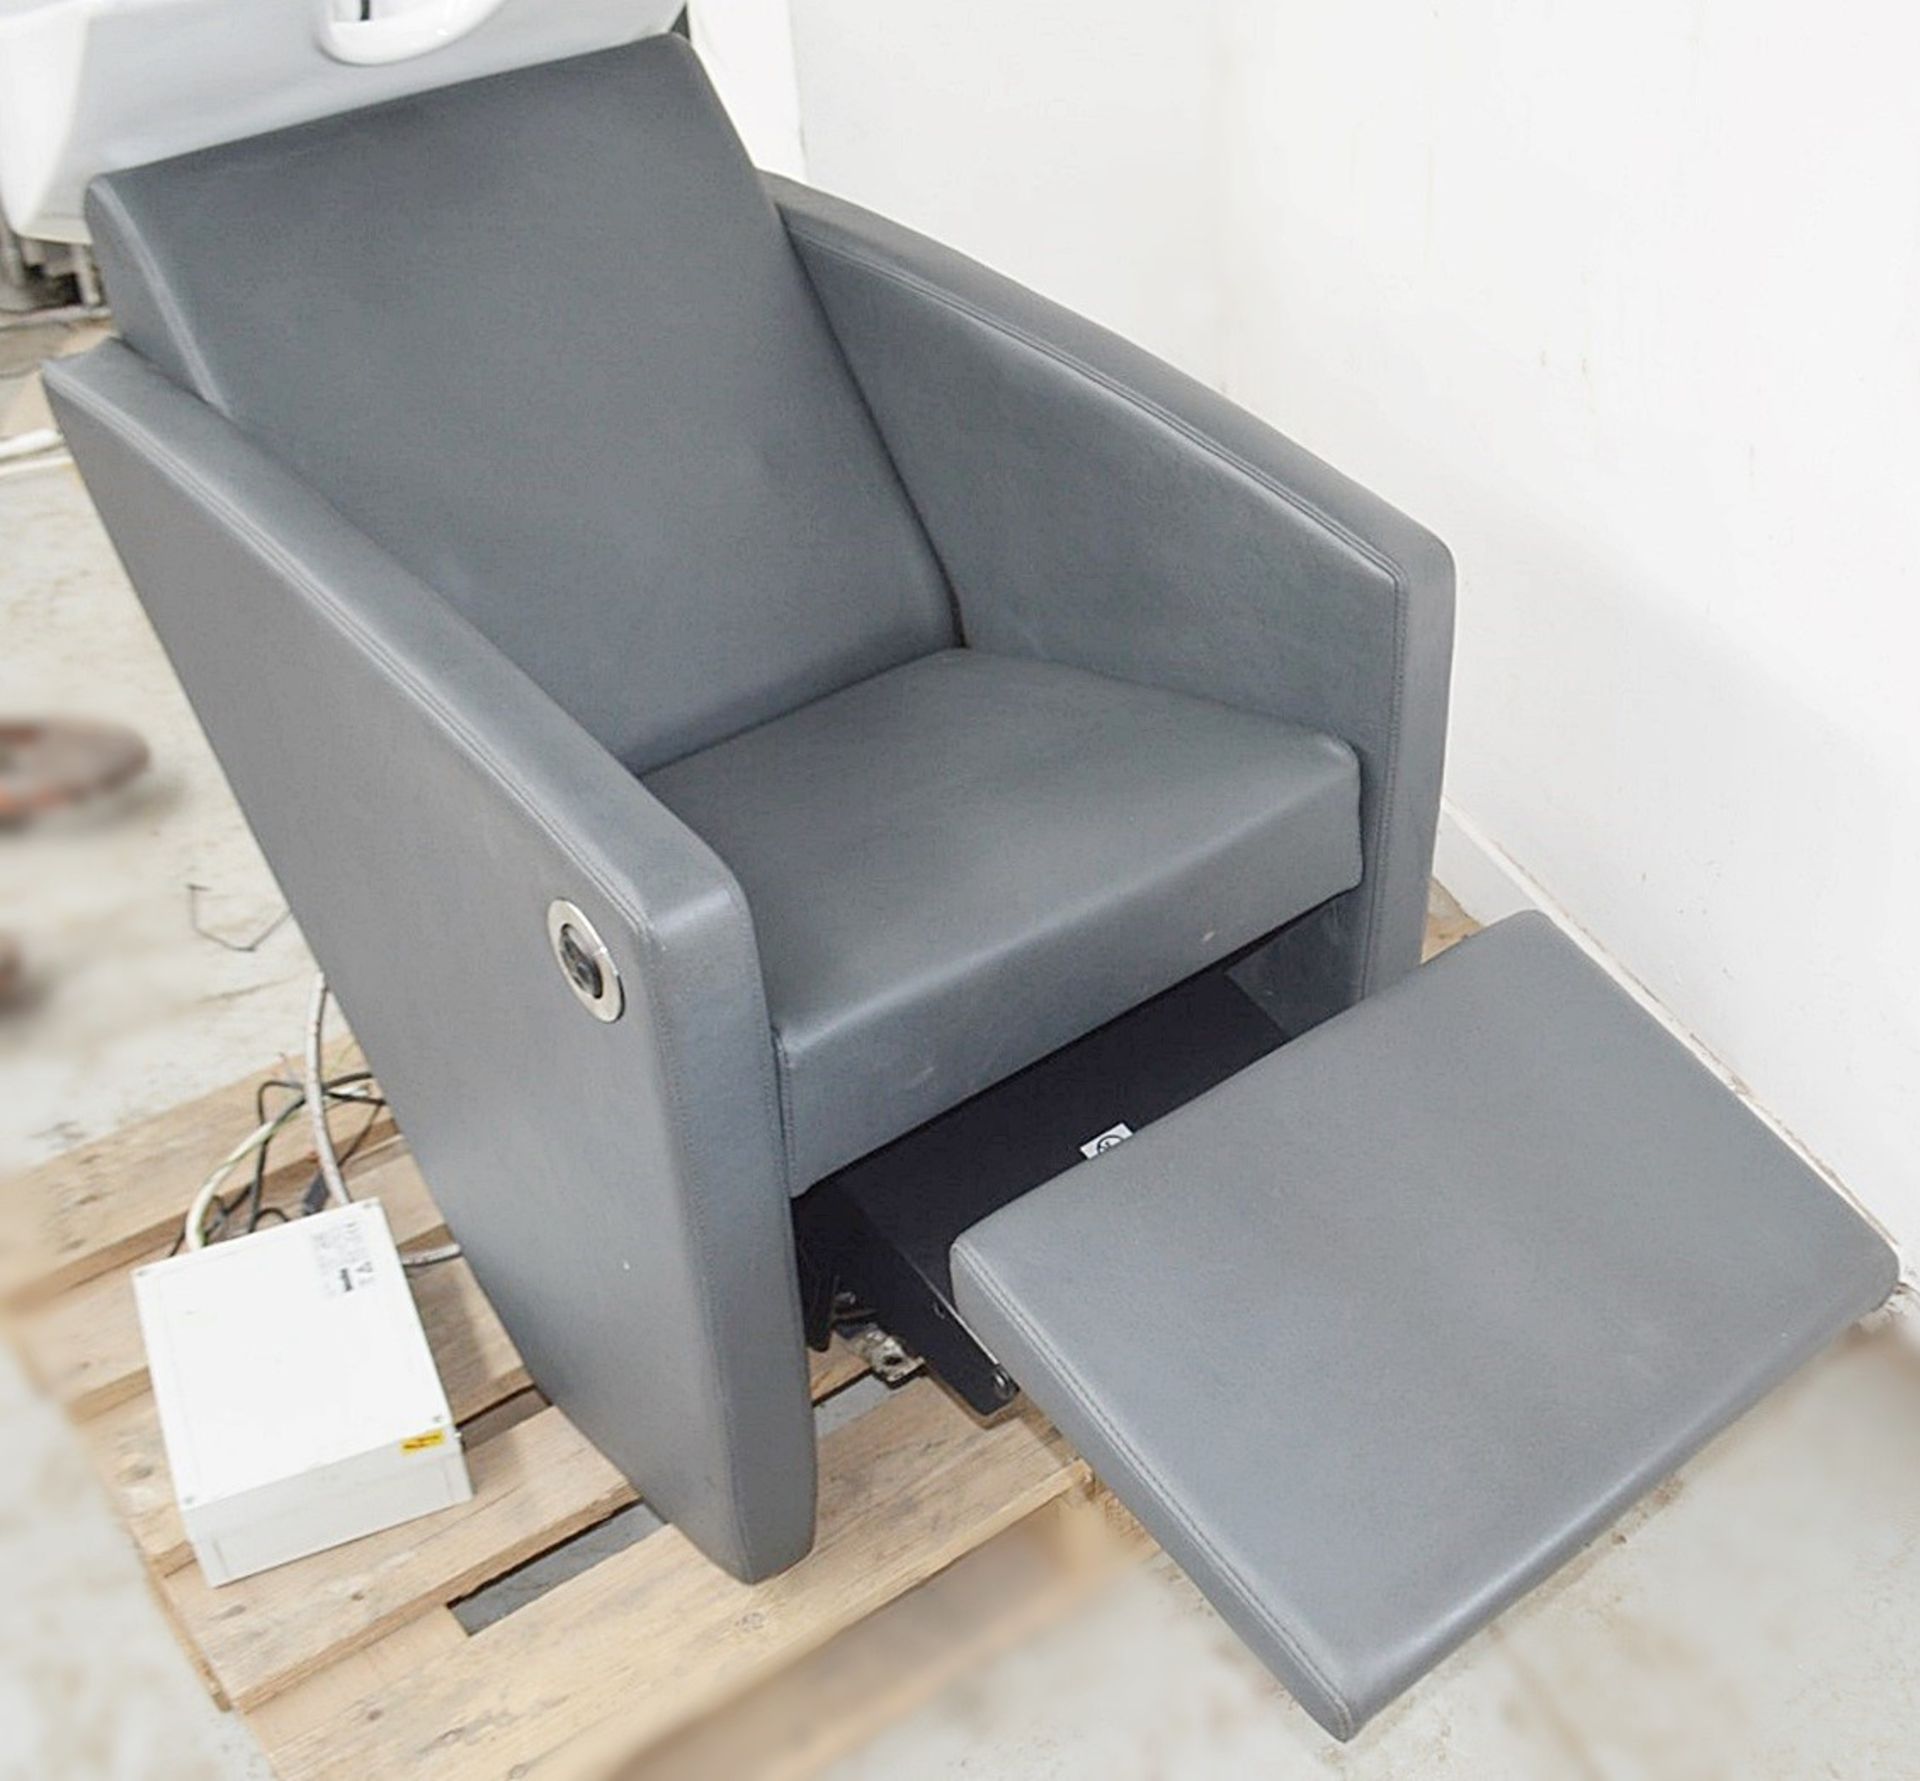 1 x Professional Reclining Hair Washing Chair With Basin Shower And Foot Rest - Image 17 of 19